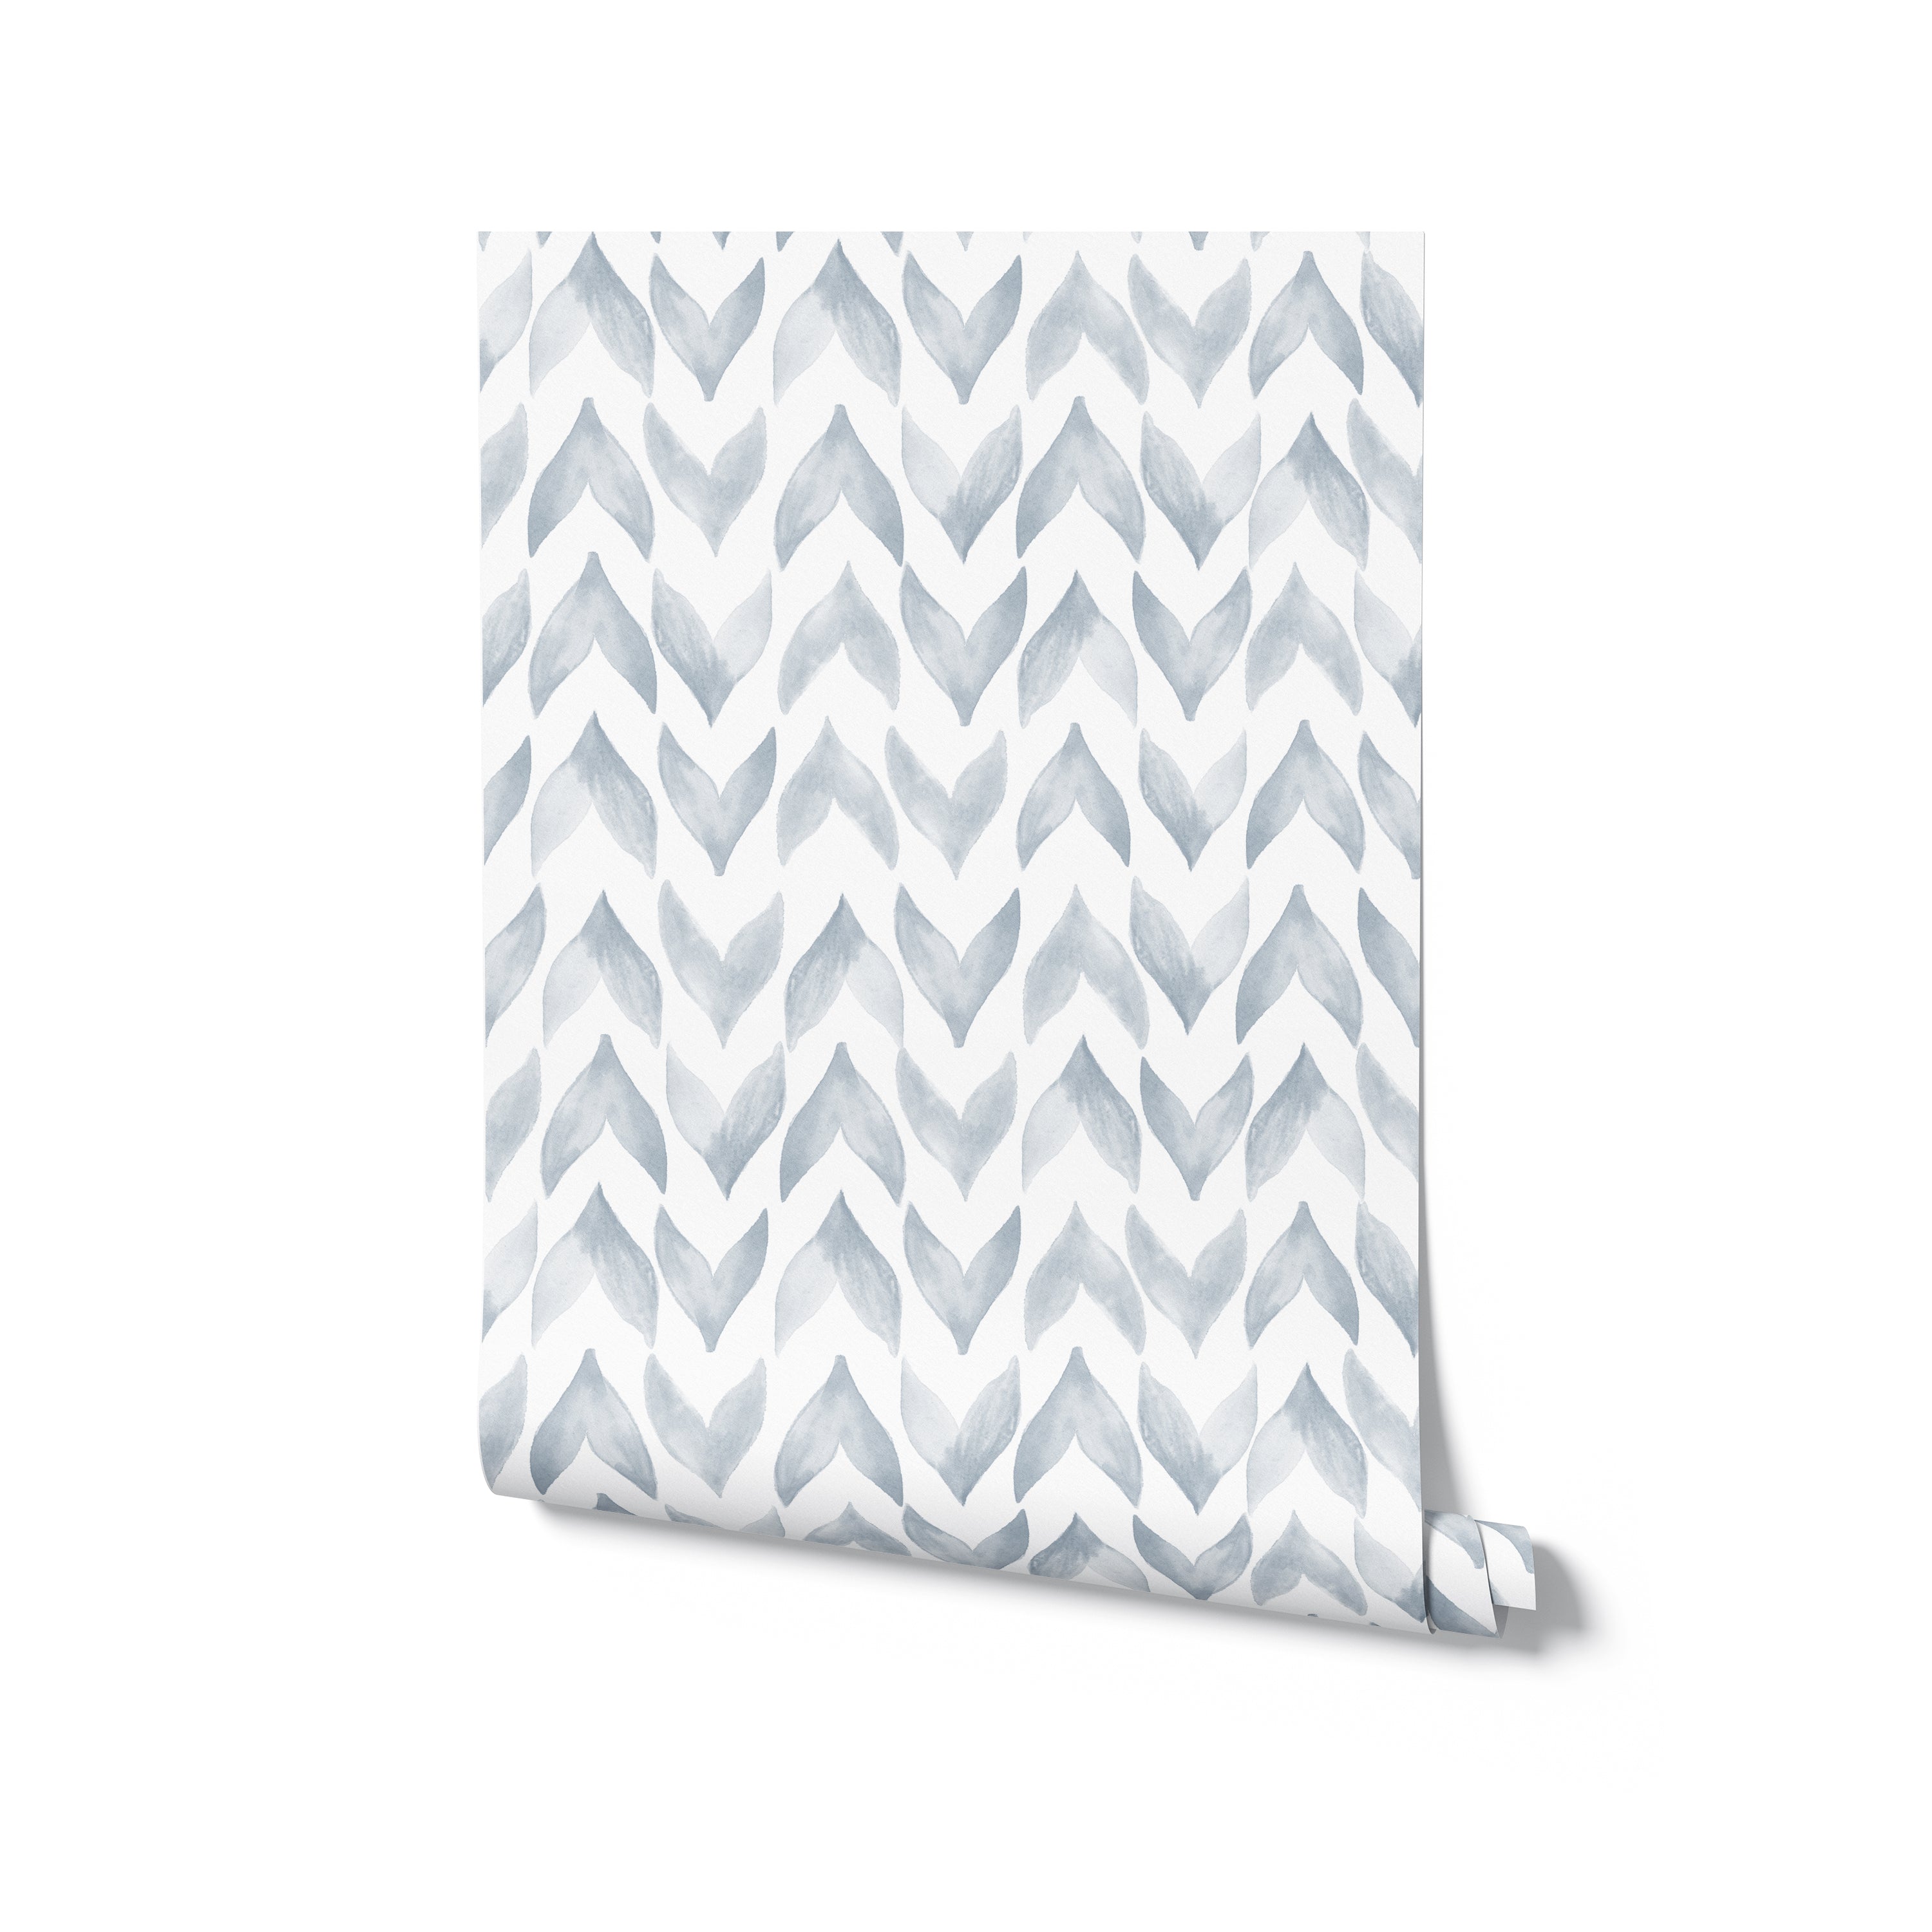 A wallpaper sample with a geometric pattern known as Moroccan Tile, featuring a seamless array of pale blue and white arrow-like shapes in a watercolor style, forming a zigzag design.